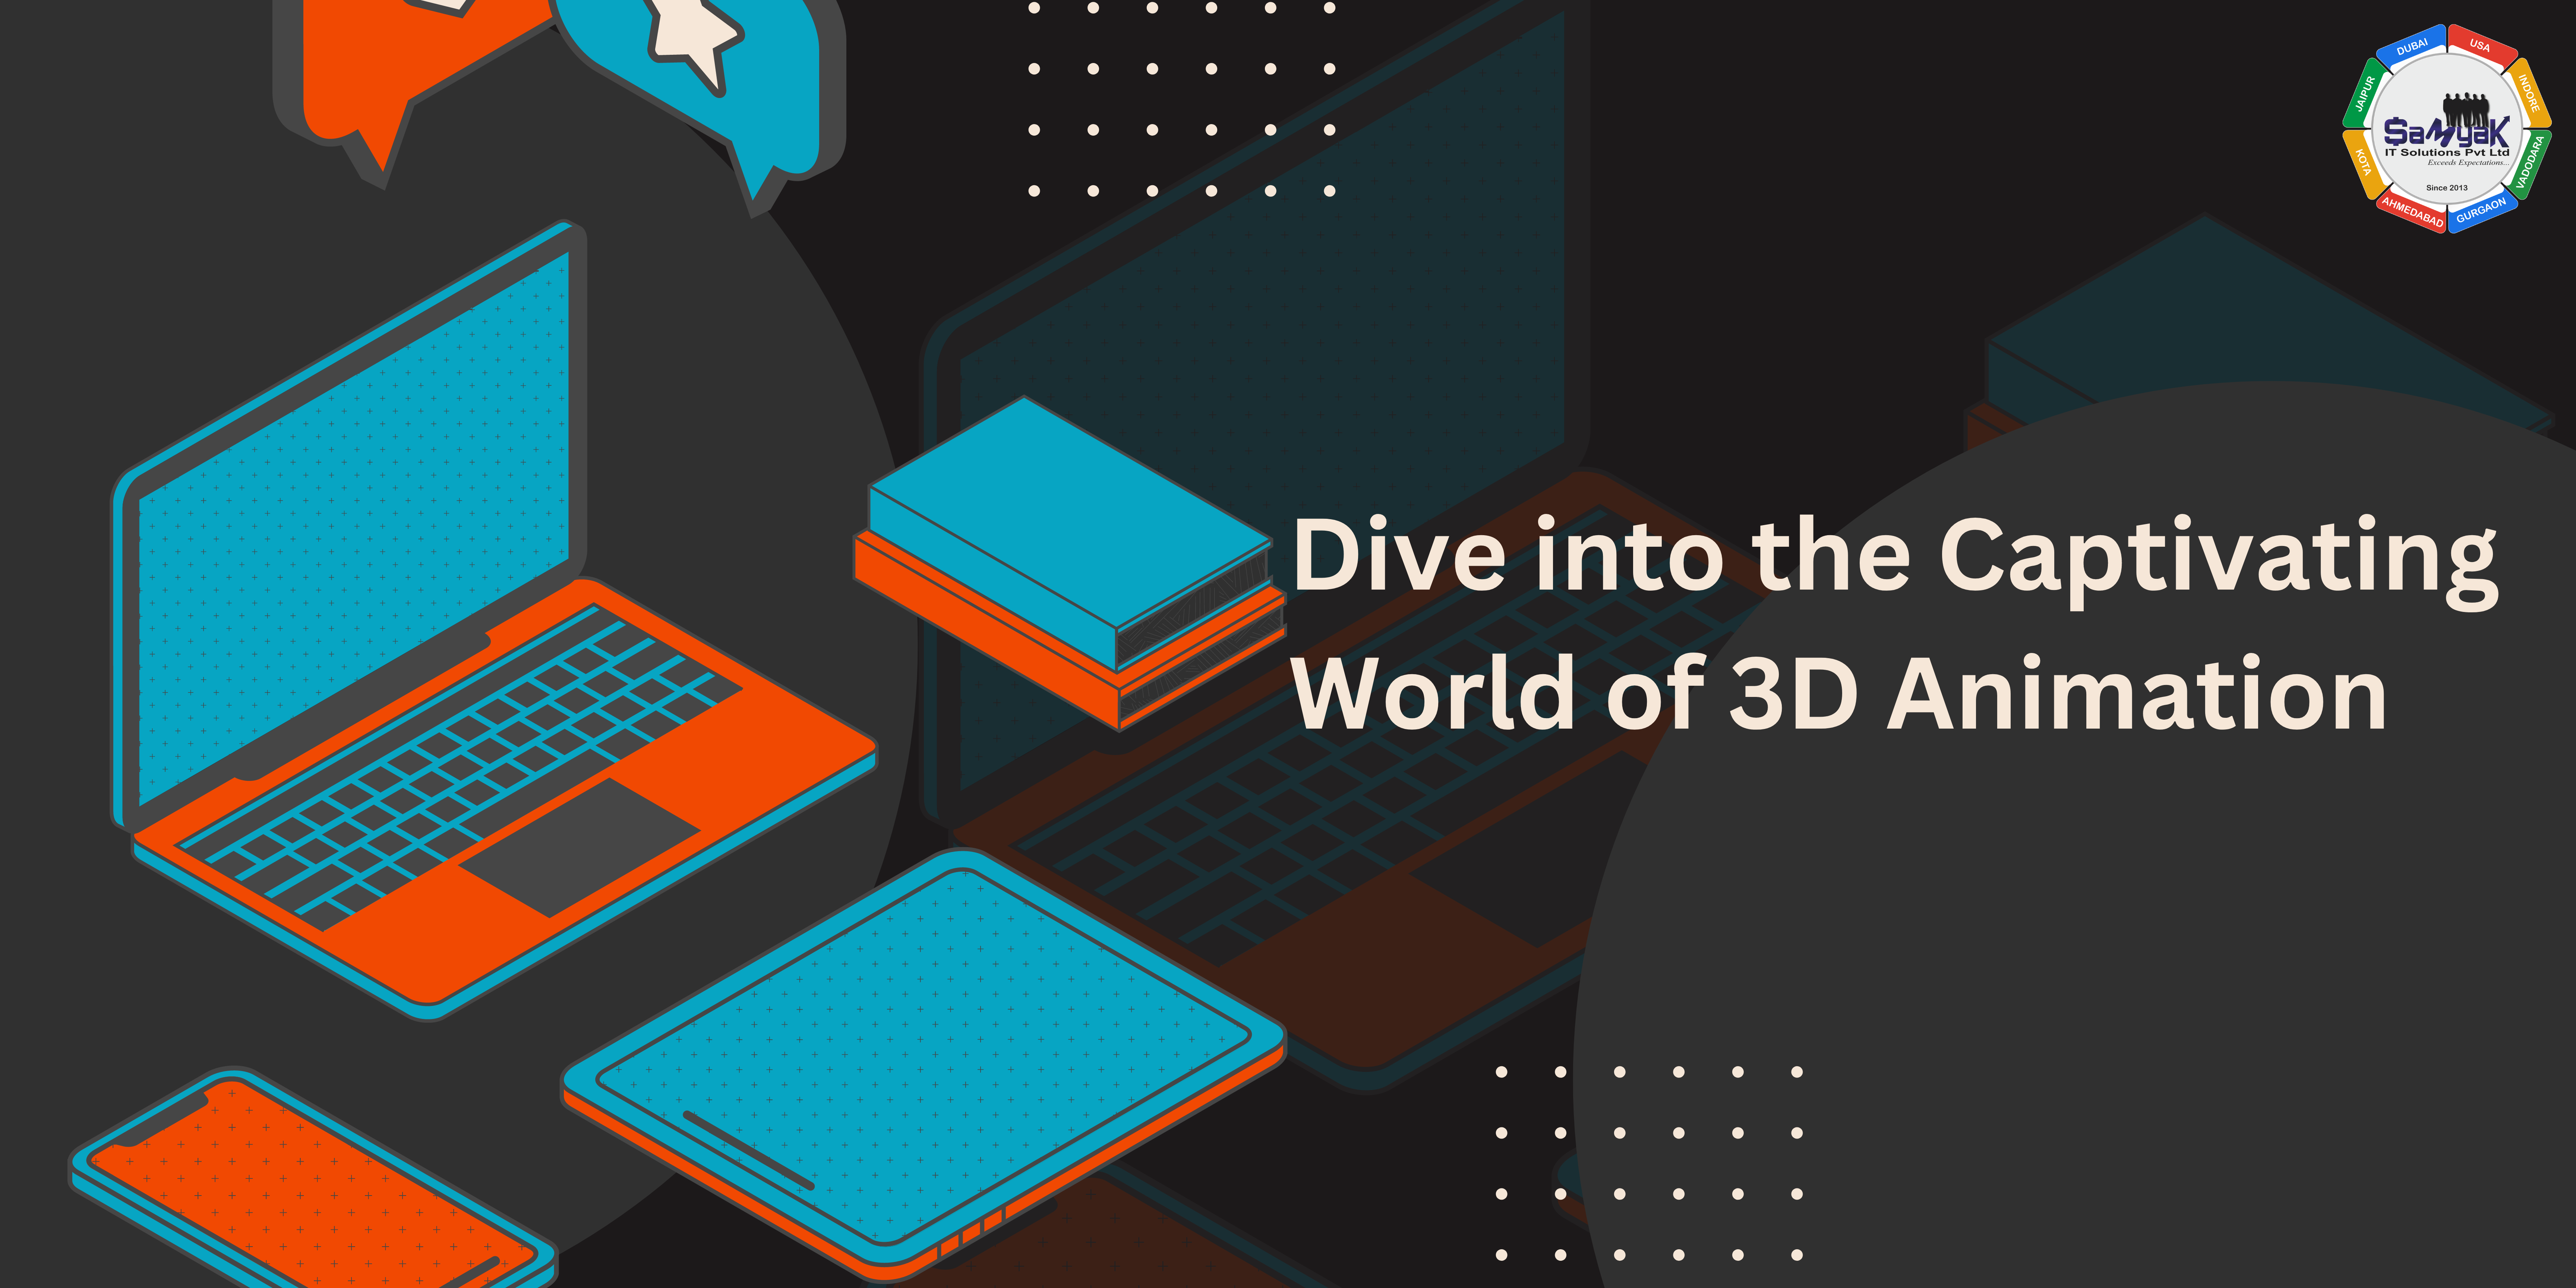 Dive into the Captivating World of 3D Animation